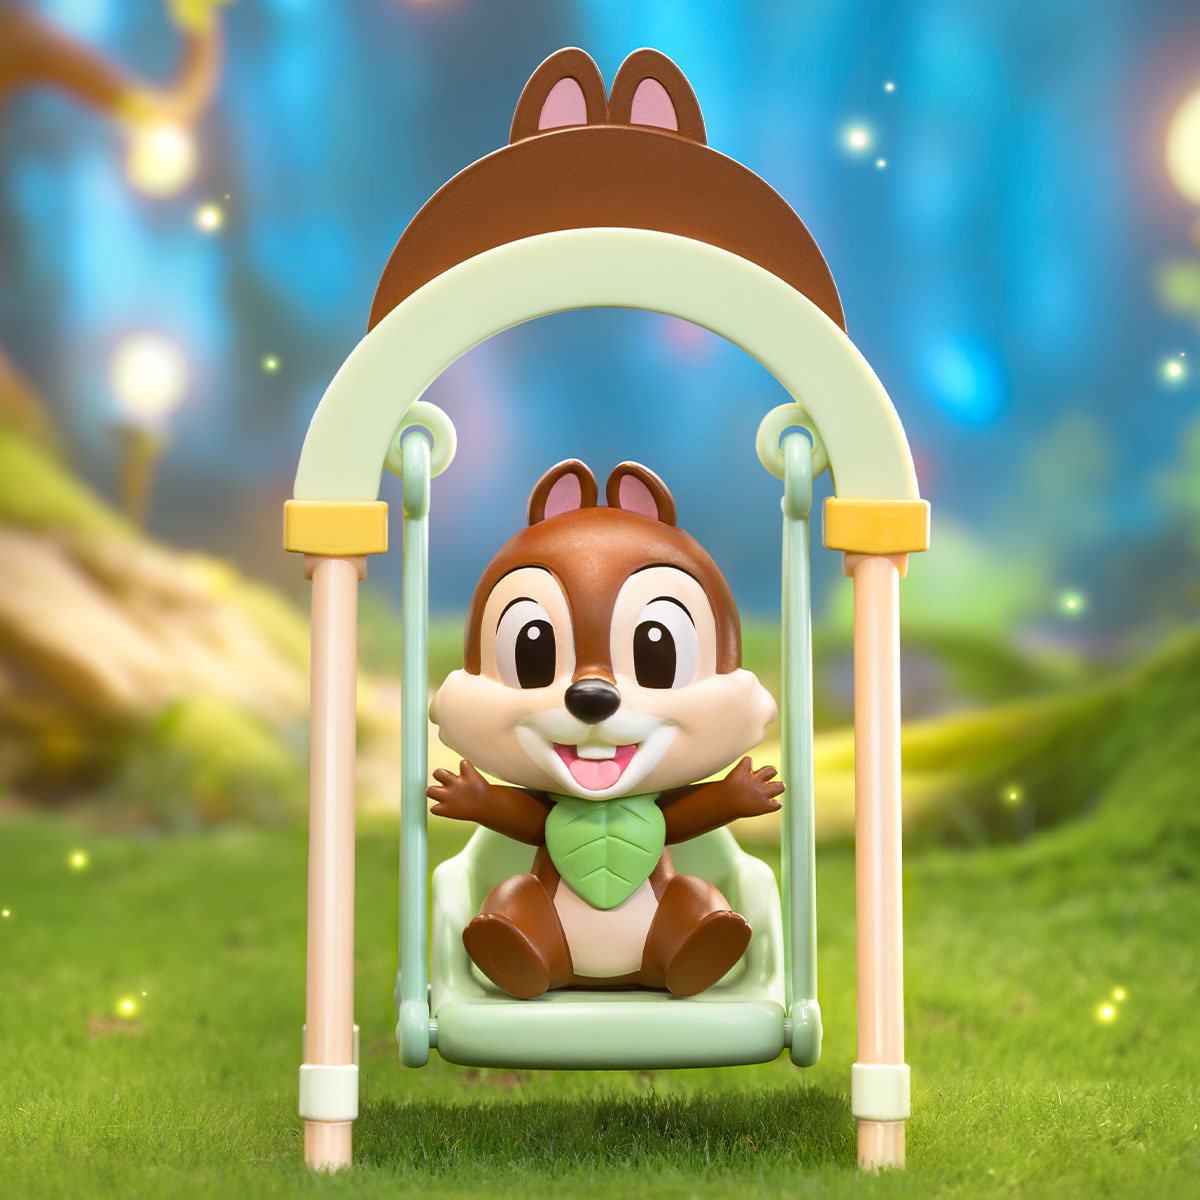 Alt text: Disney Swing Blind Box Series toy squirrel on a swing, part of a collection with 9 regular and 1 secret design